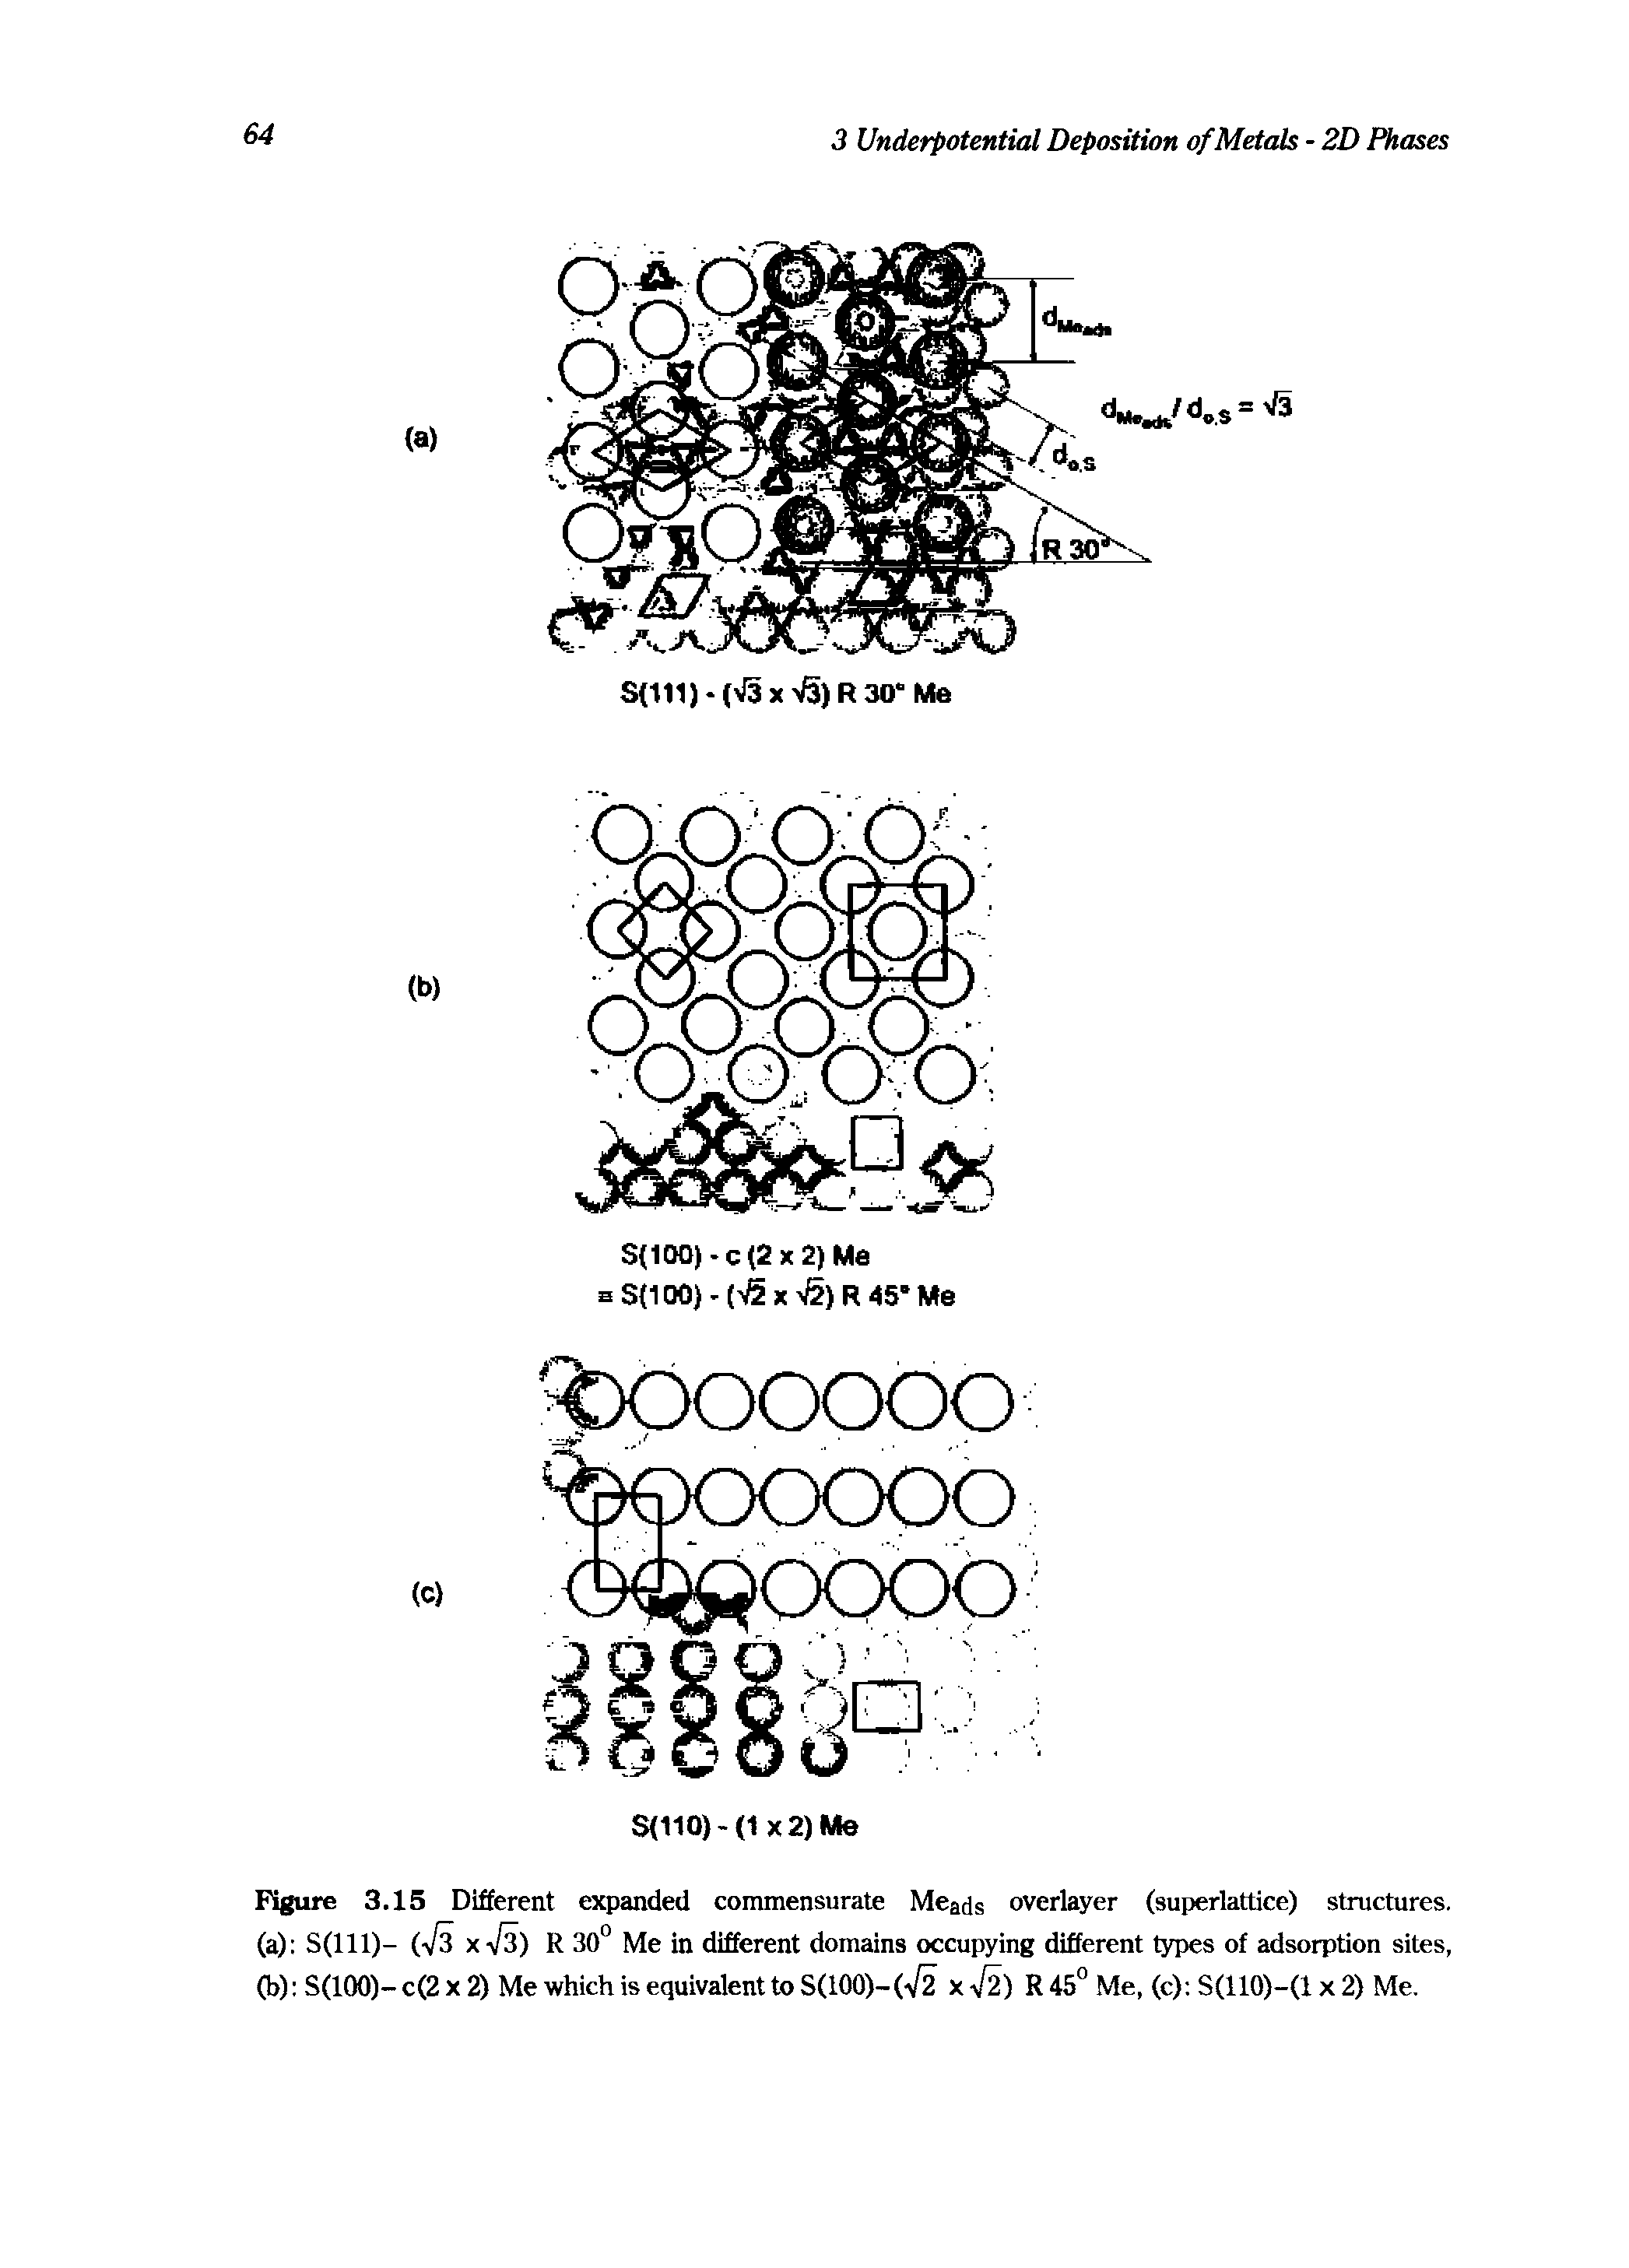 Figure 3.15 Different expanded commensurate Meads overlayer (superlattice) structures.